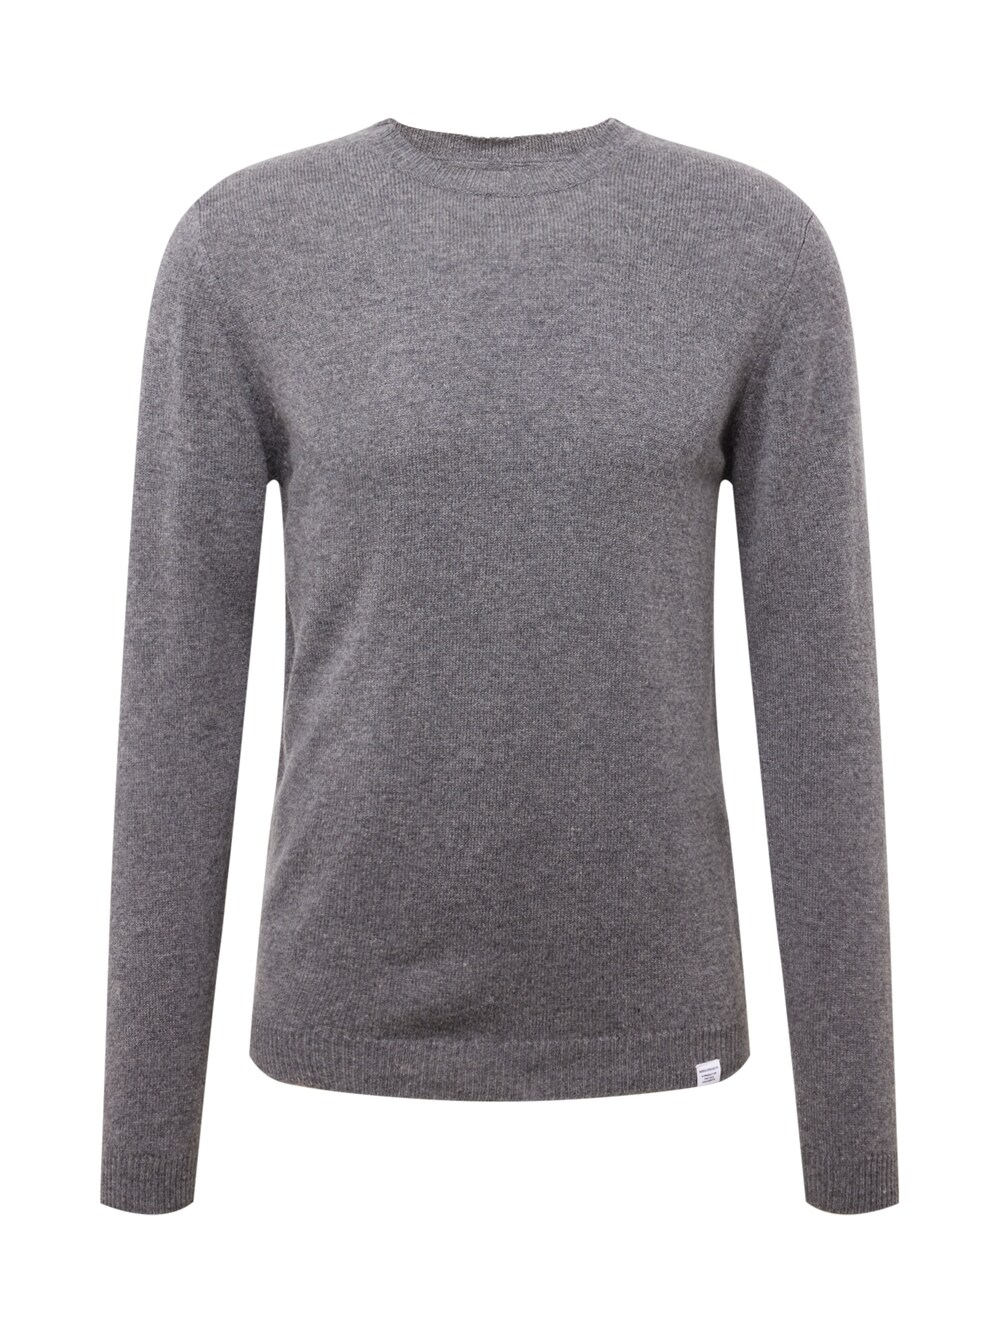 Свитер NORSE PROJECTS Sigfred, серый джемпер norse projects sigfred lambswool knit серый